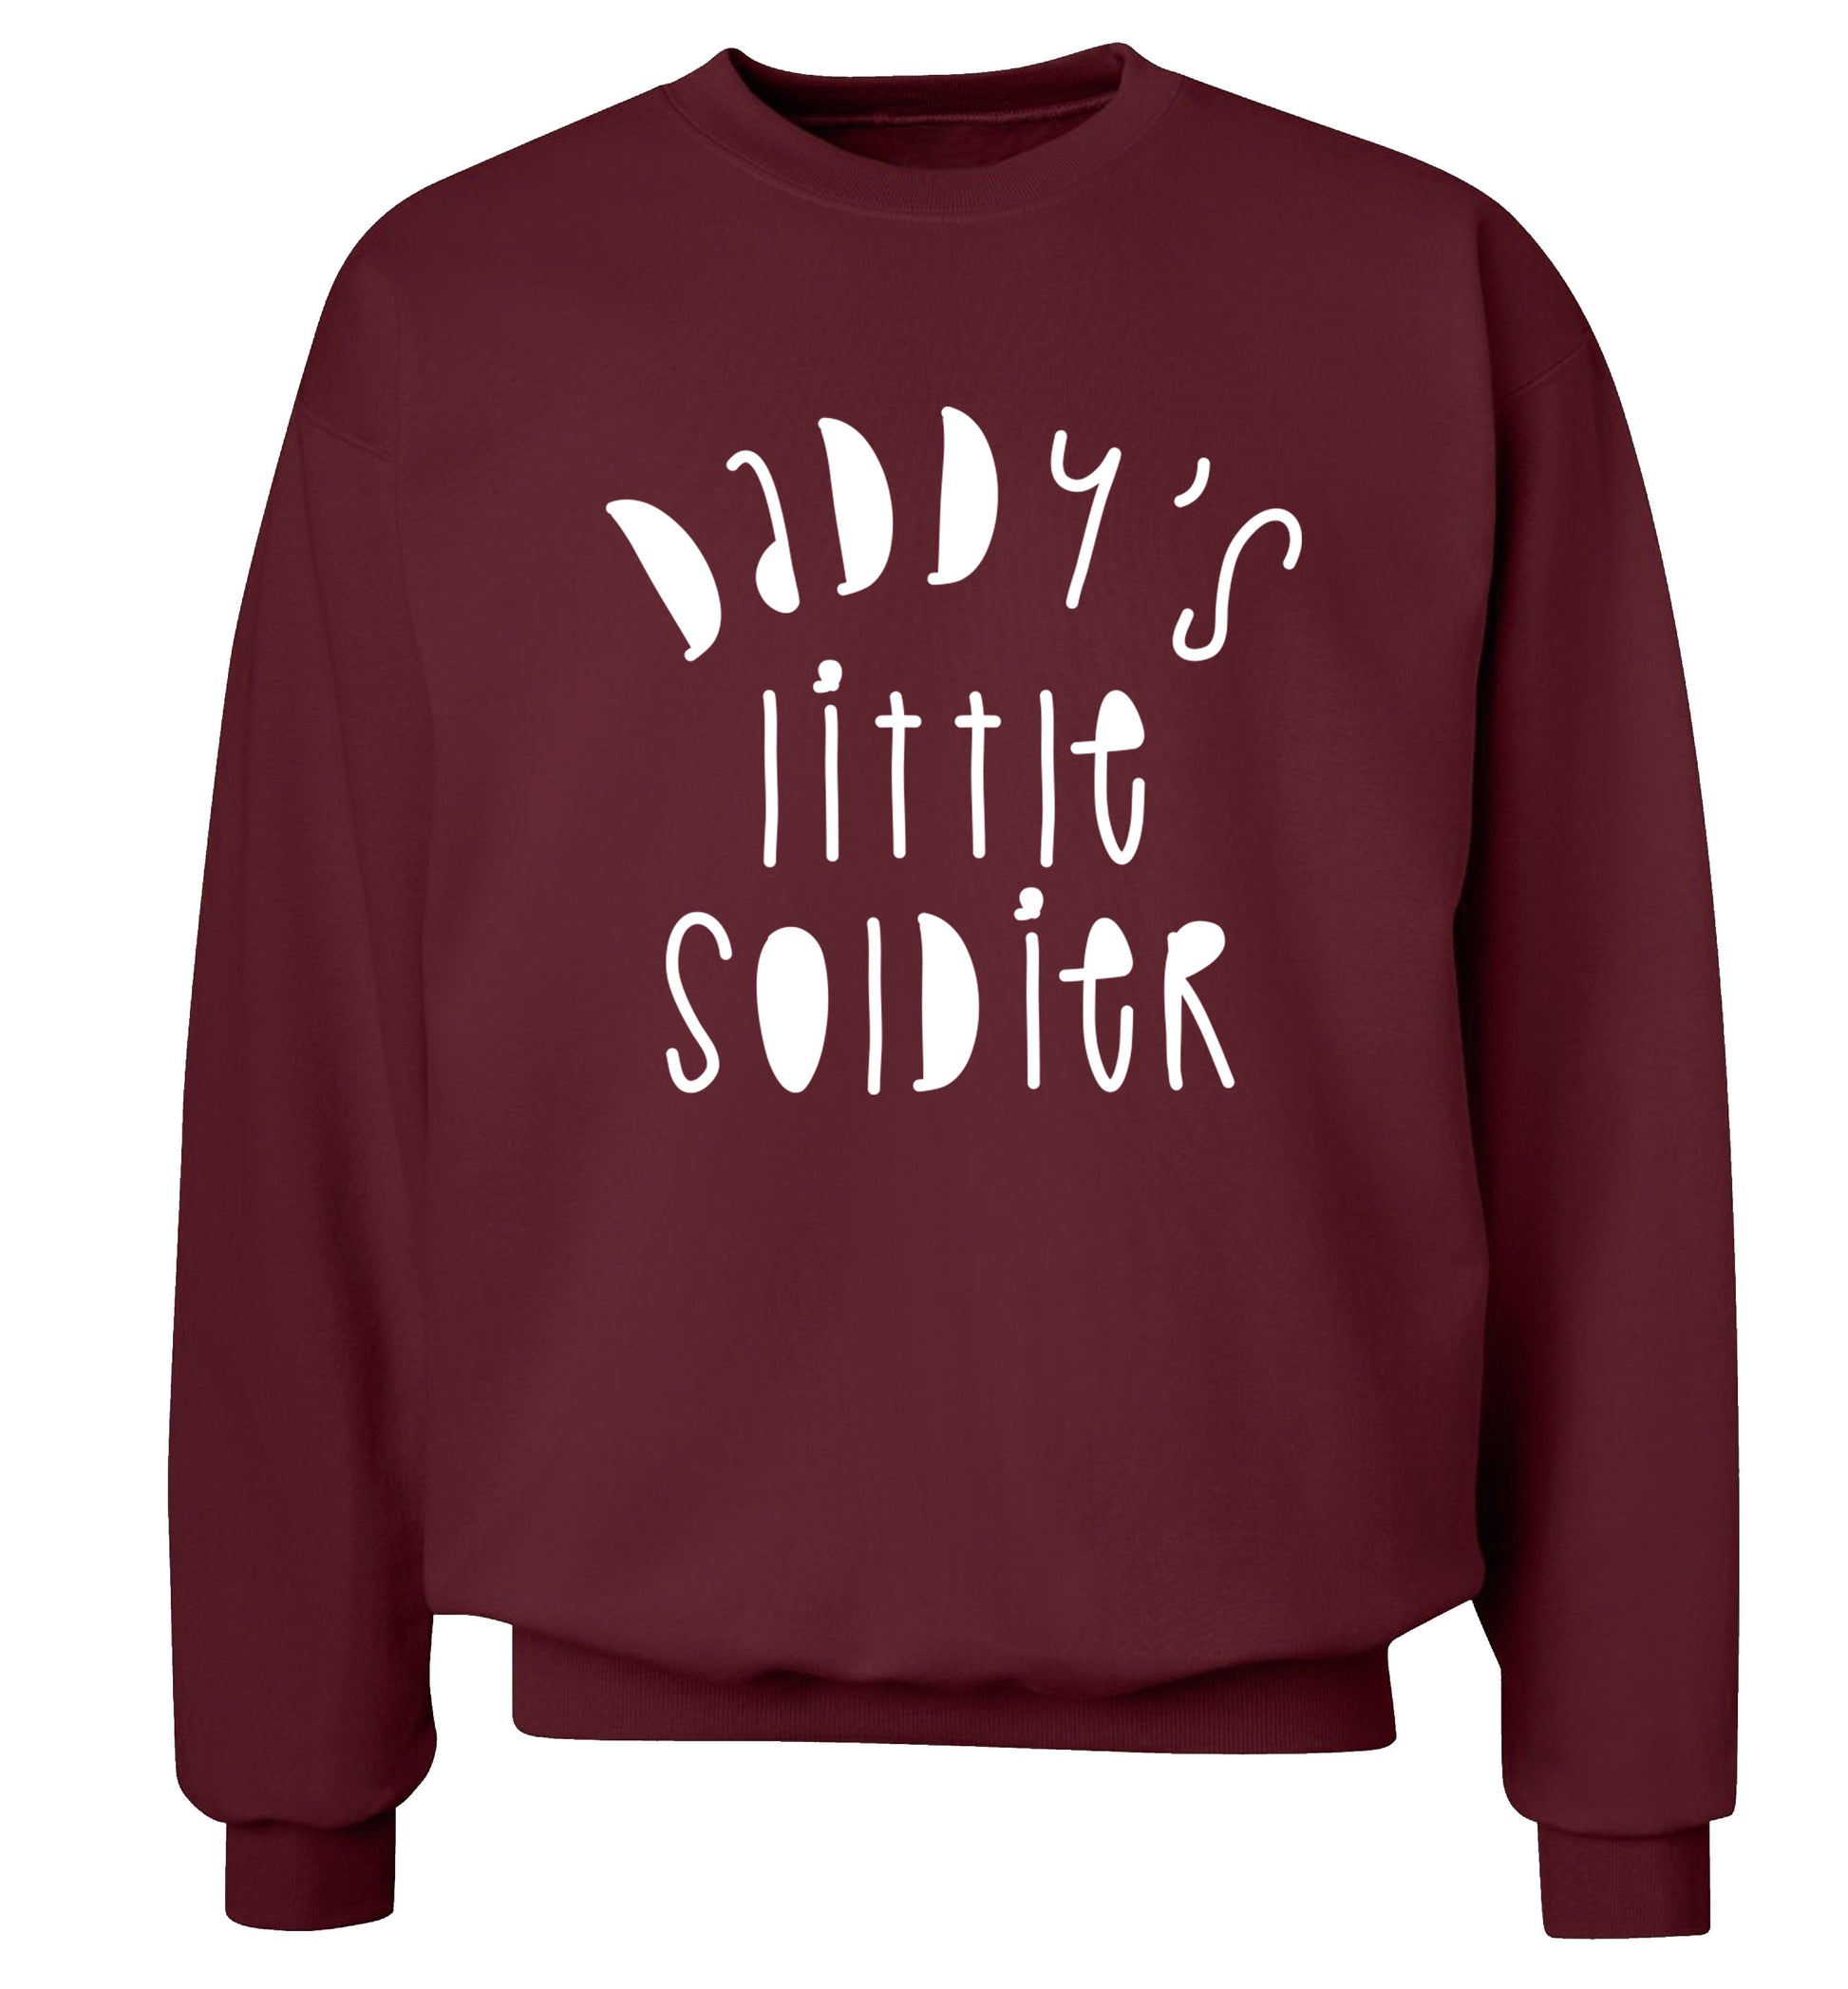 Daddy's little soldier Adult's unisex maroon Sweater 2XL